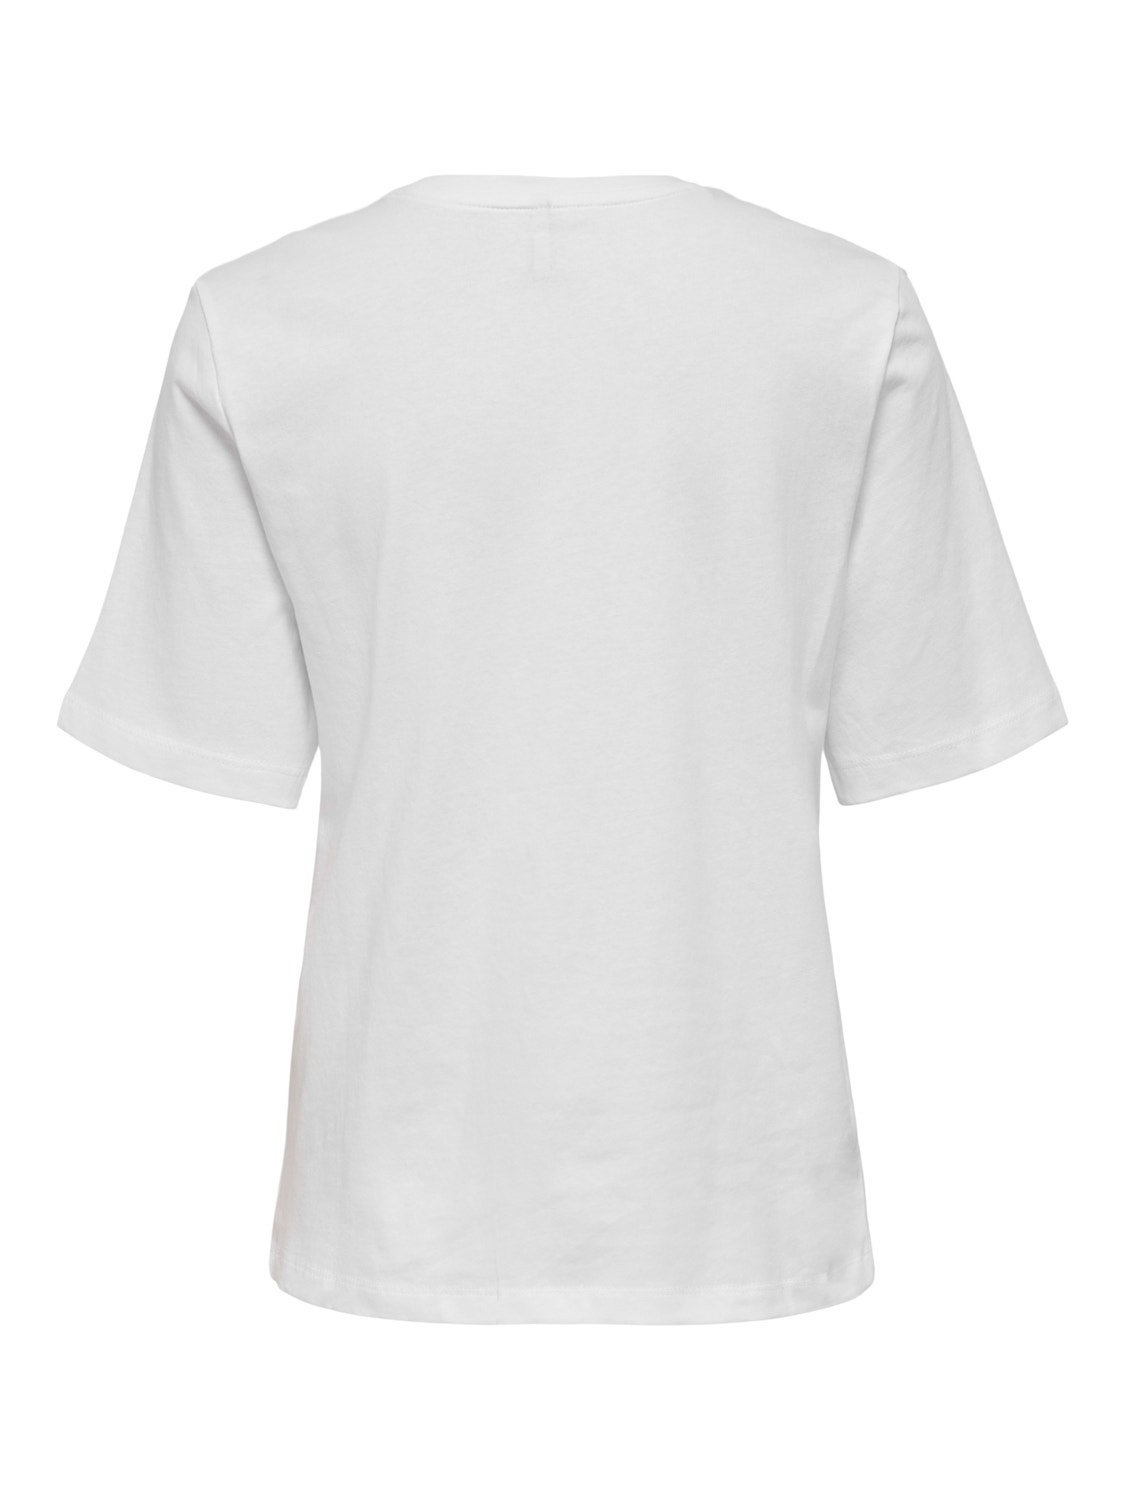 ONLY Box Fit O-Neck T-Shirt -Bright White - 15259050